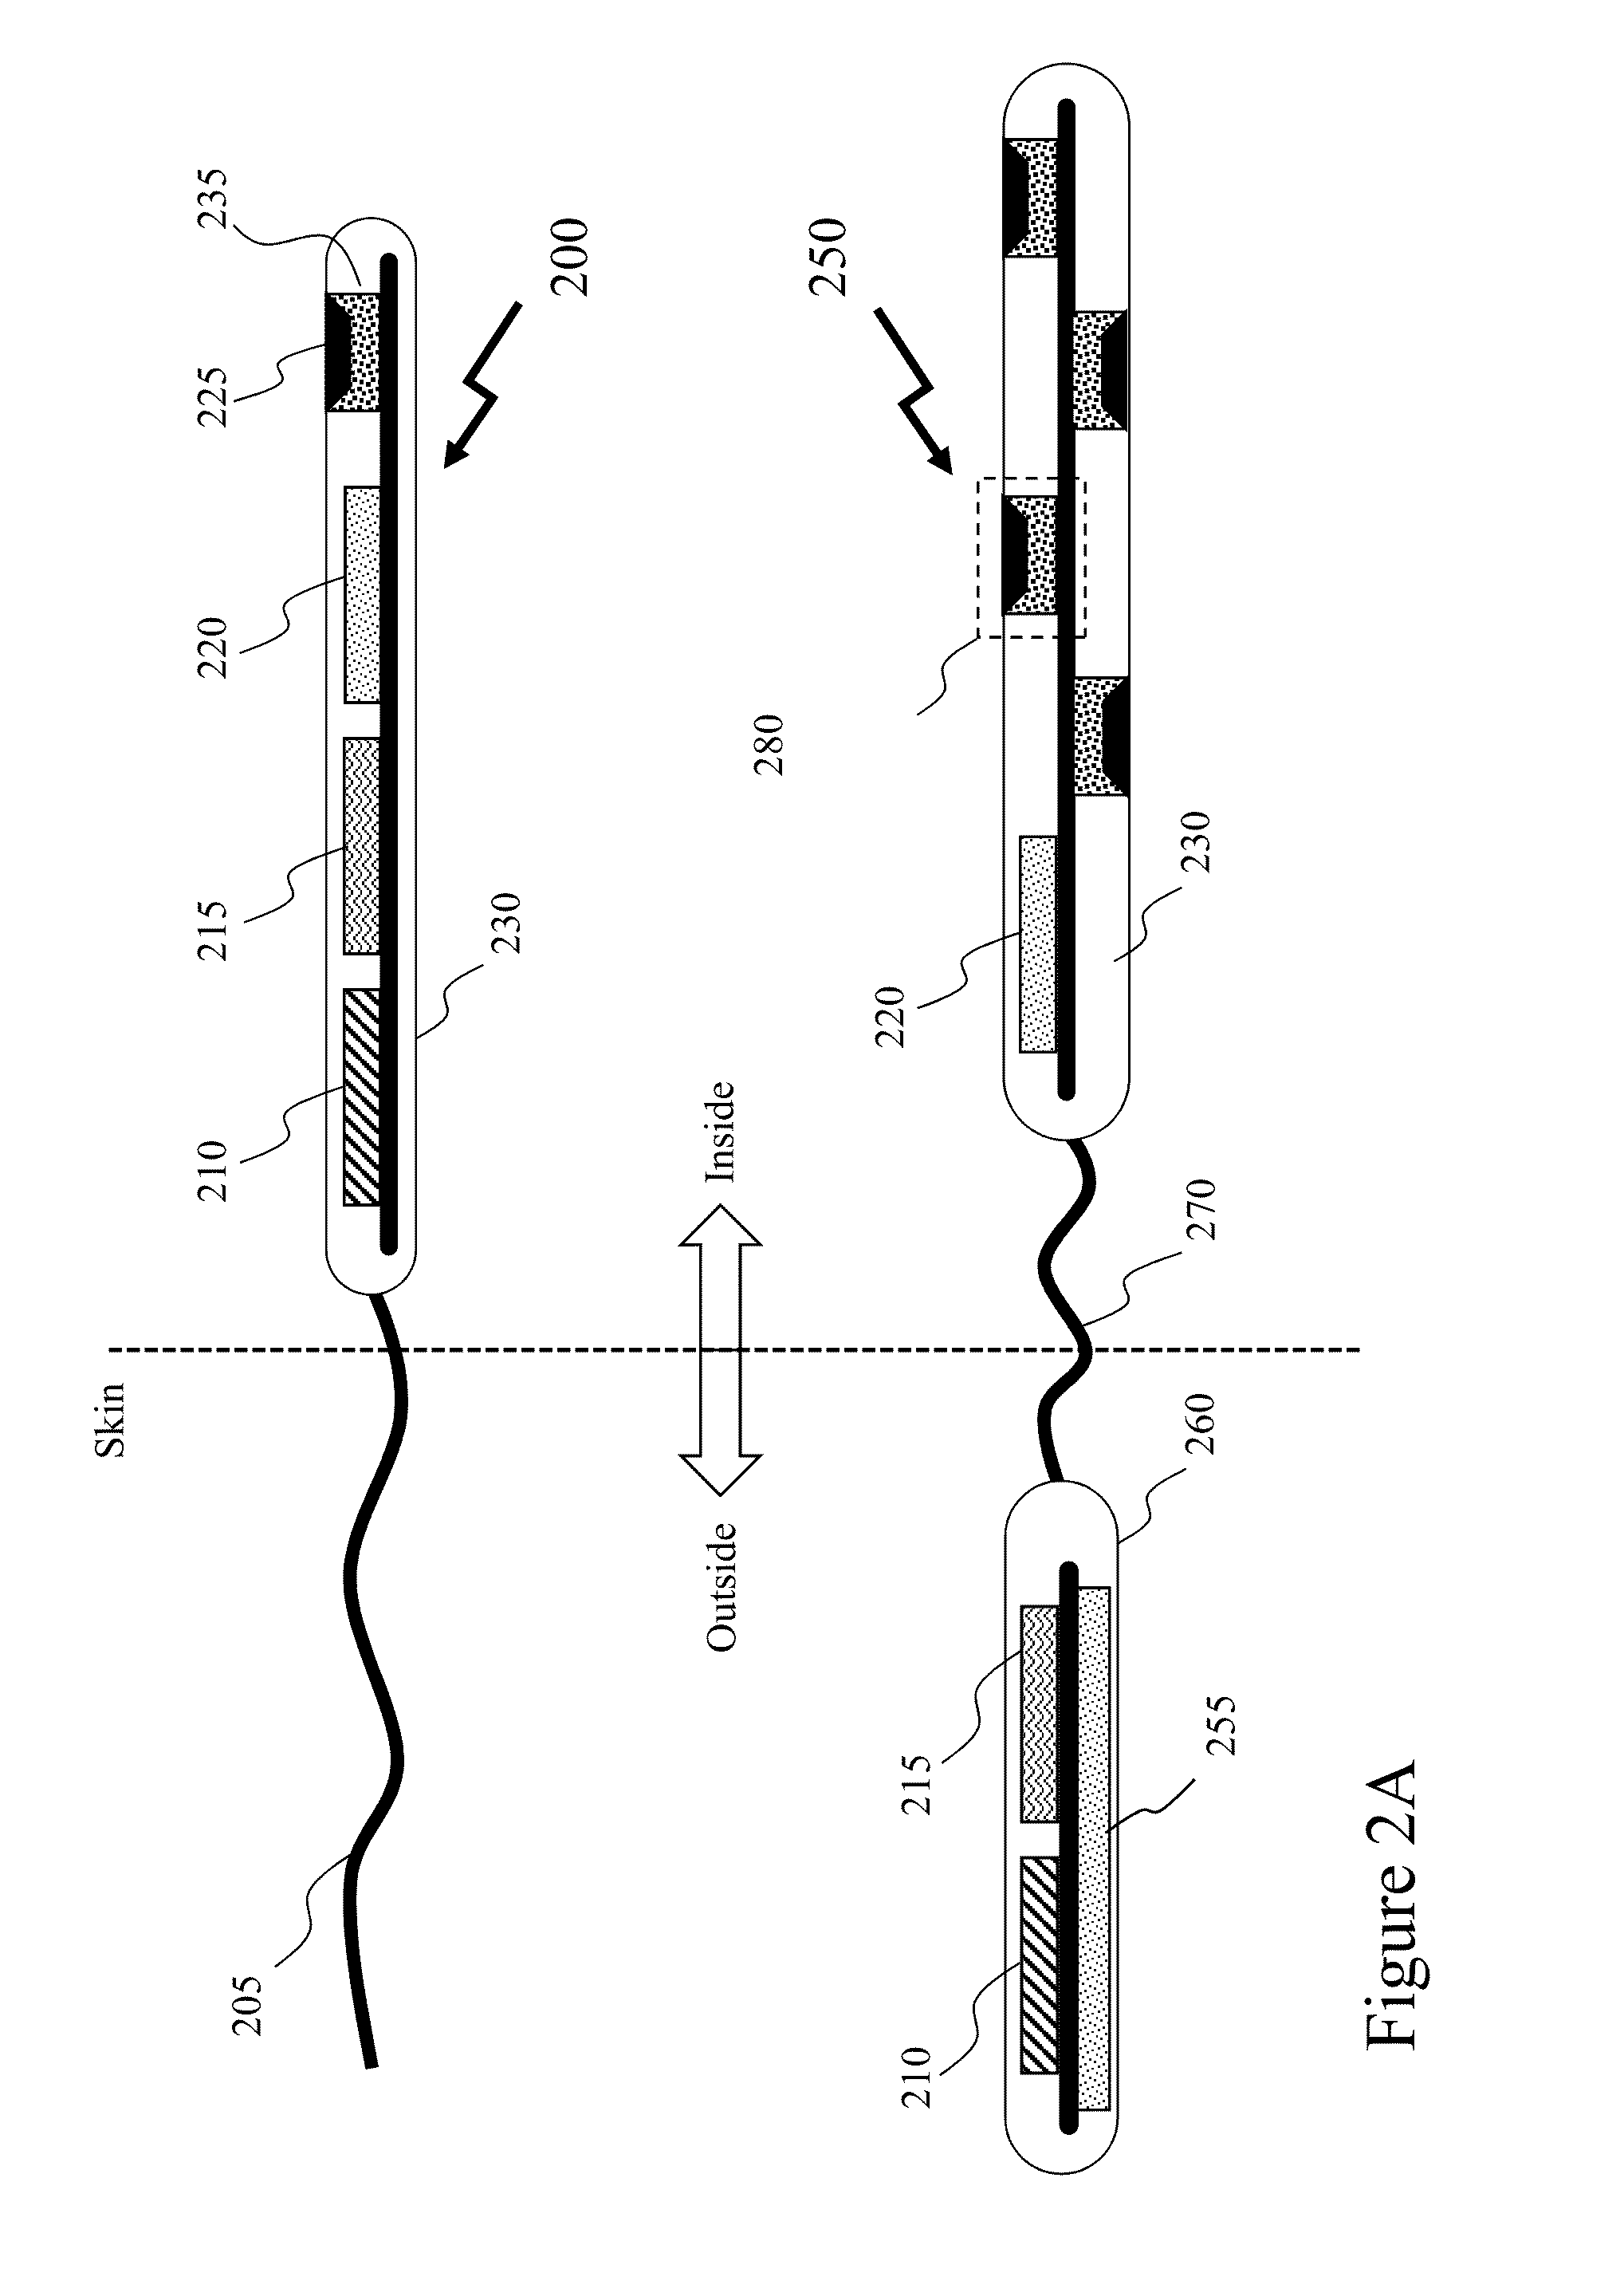 Methods and systems relating to biological systems with embedded MEMS sensors